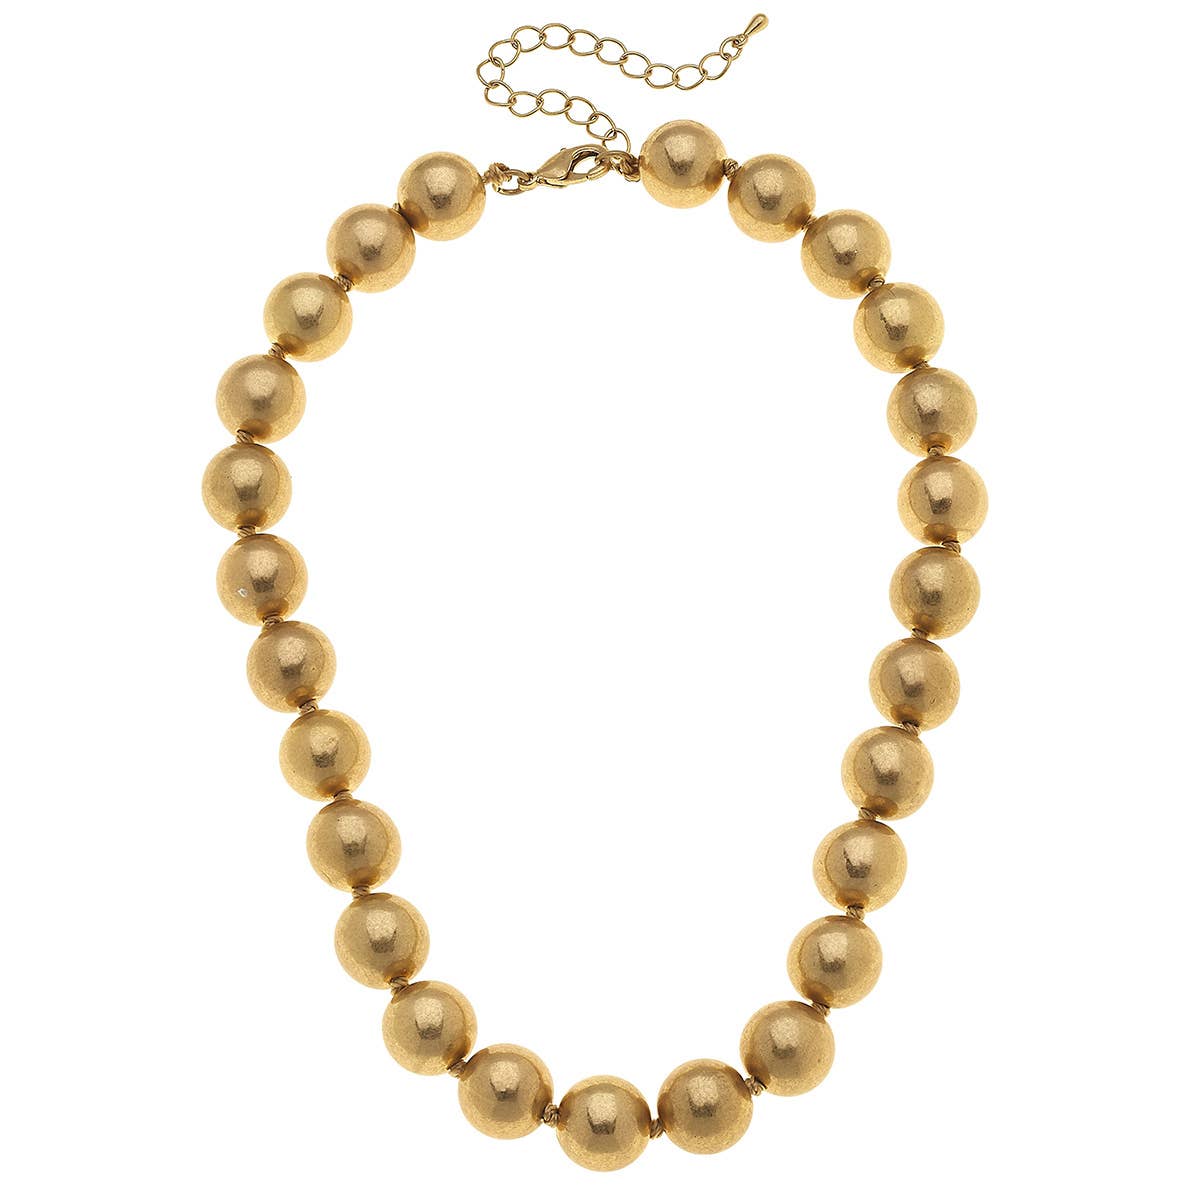 Eleanor Beaded Necklace in Worn Gold